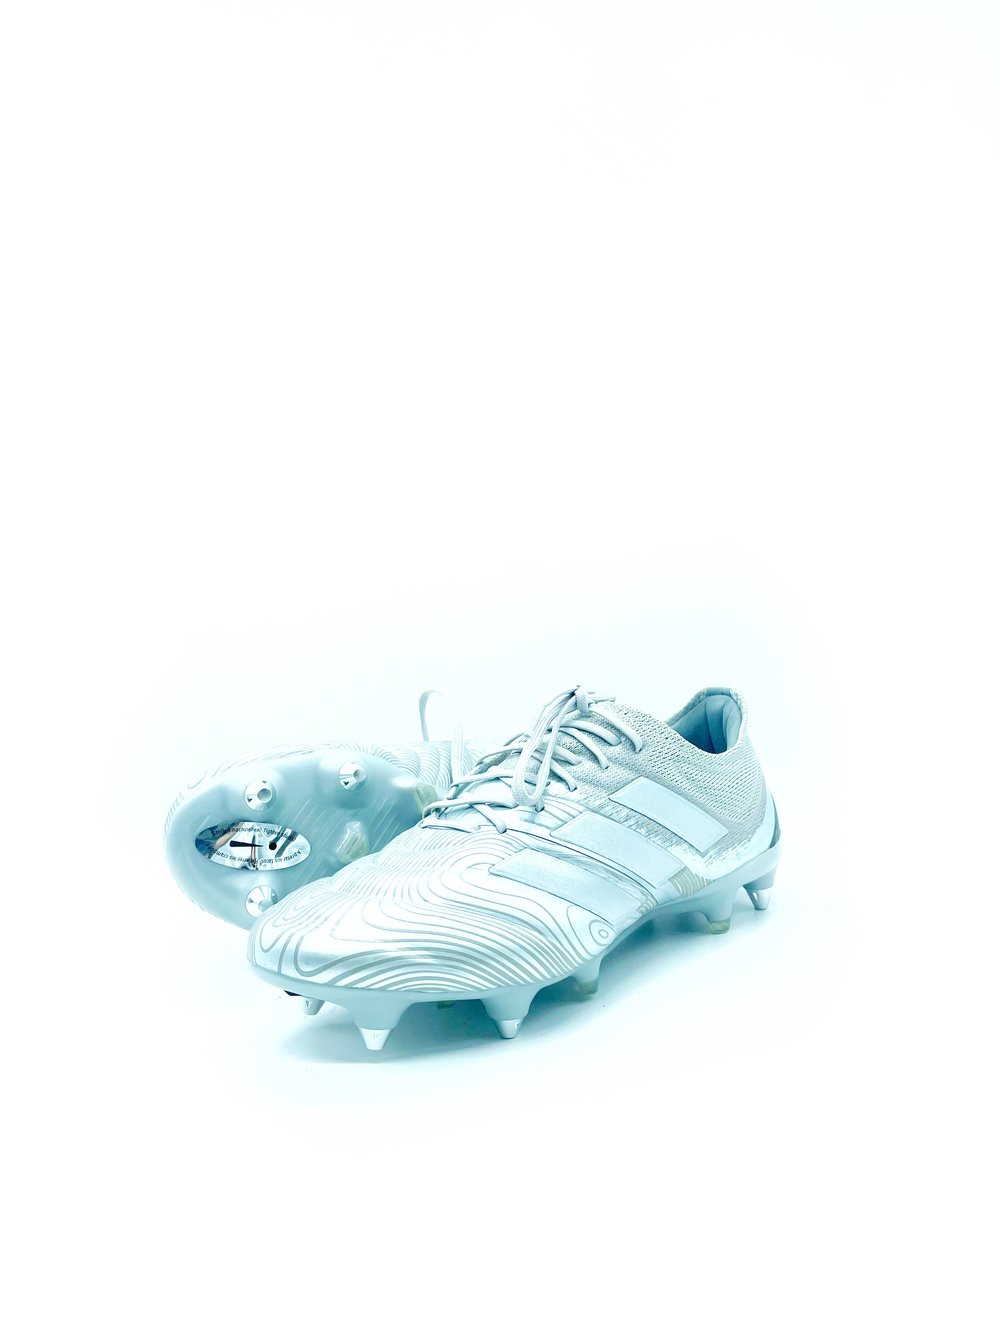 Image of Adidas Copa 20.1 SILVED SG 